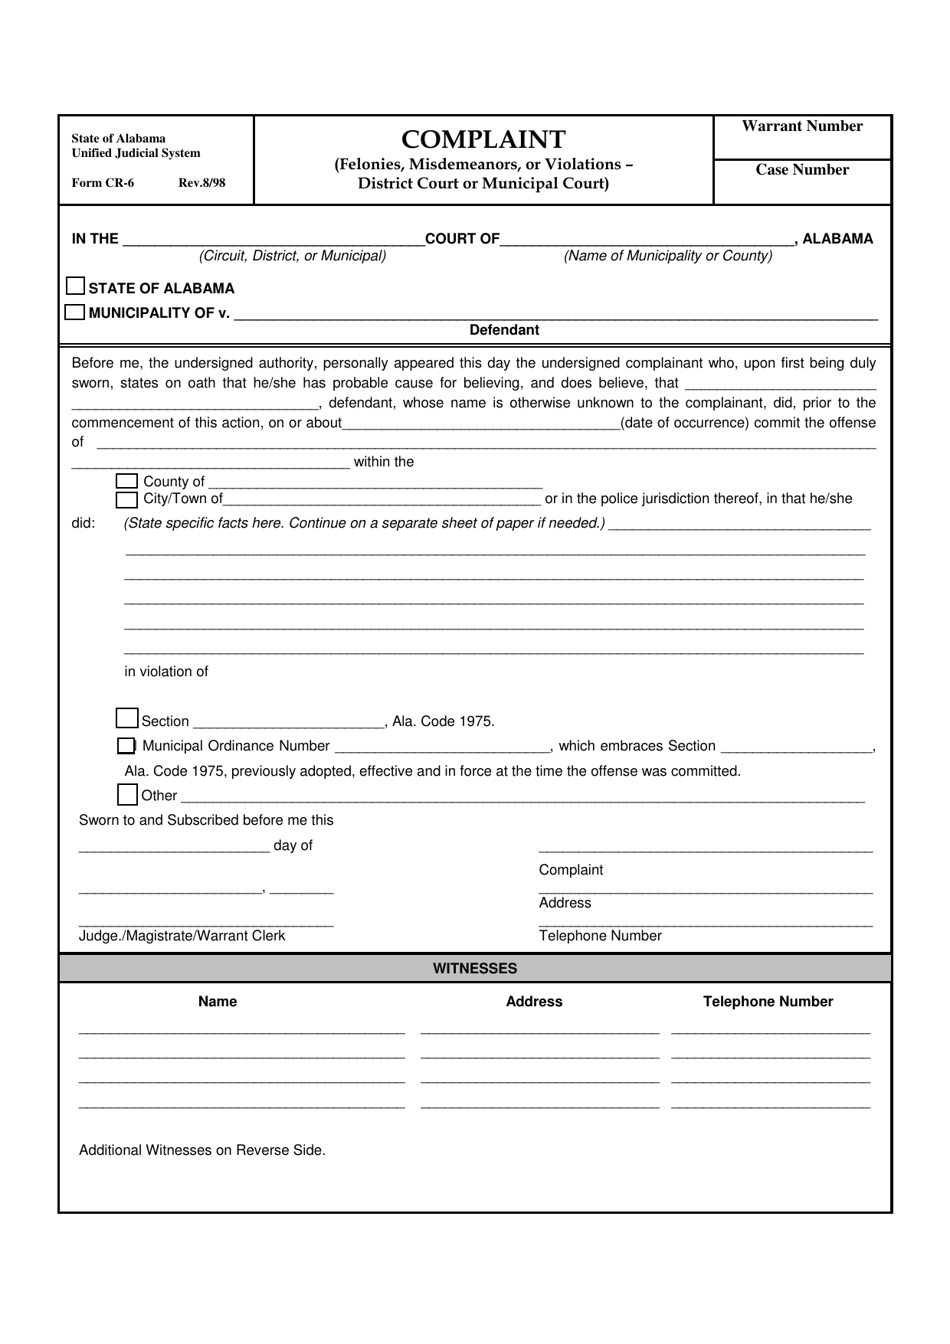 Form CR-06 Complaint (Felonies, Misdemeanors, or Violations - District Court or Municipal Court) - Alabama, Page 1